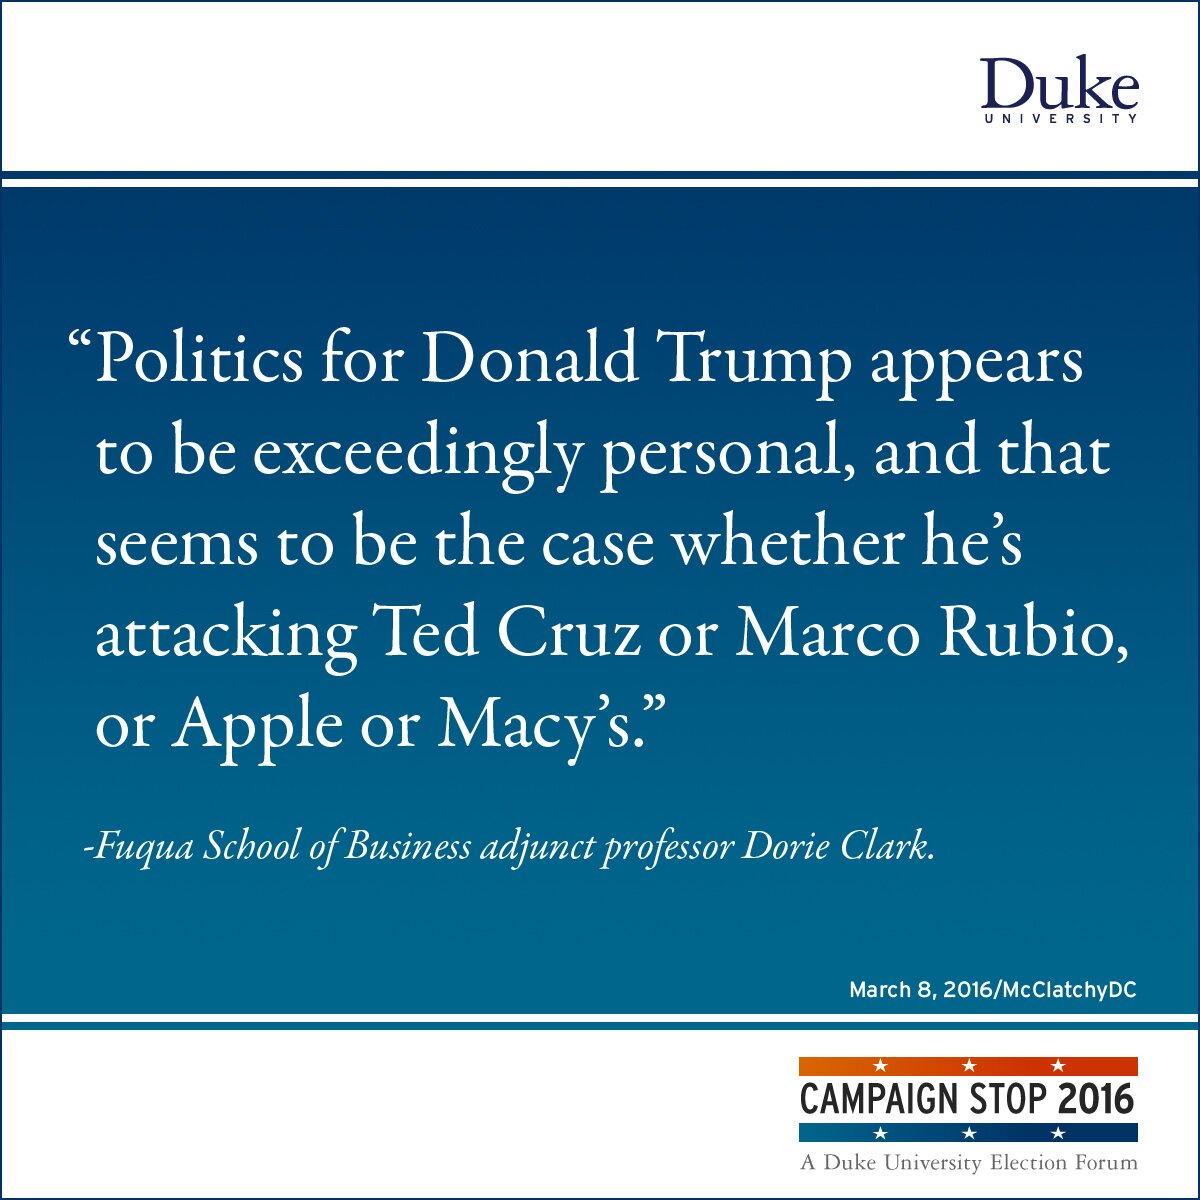 “Politics for Donald Trump appears to be exceedingly personal, and that seems to be the case whether he’s attacking Ted Cruz or Marco Rubio, or Apple or Macy’s.” -Fuqua School of Business adjunct professor Dorie Clark.